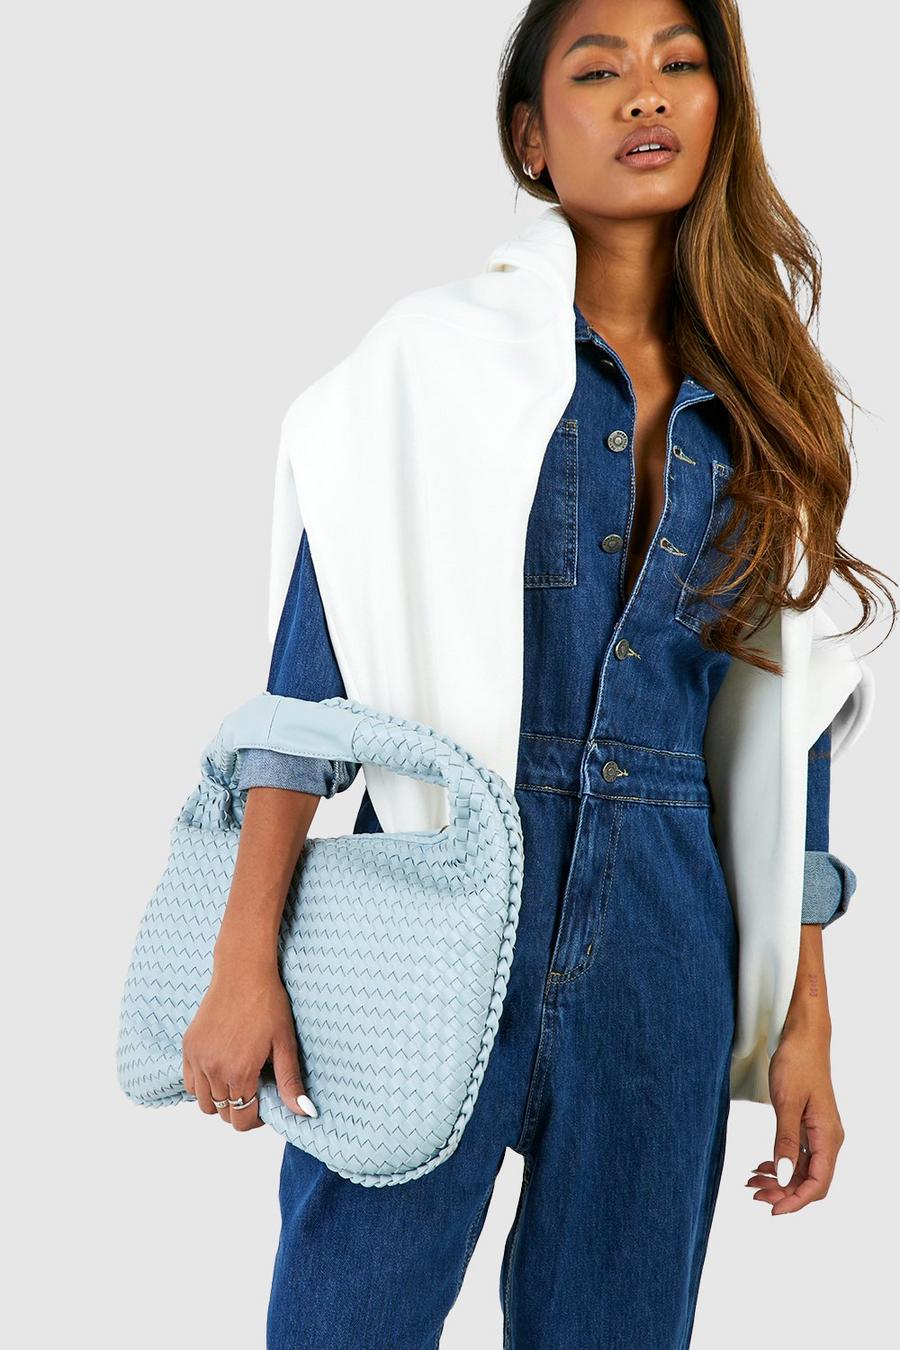 Baby blue Woven Slouchy Tote Bag